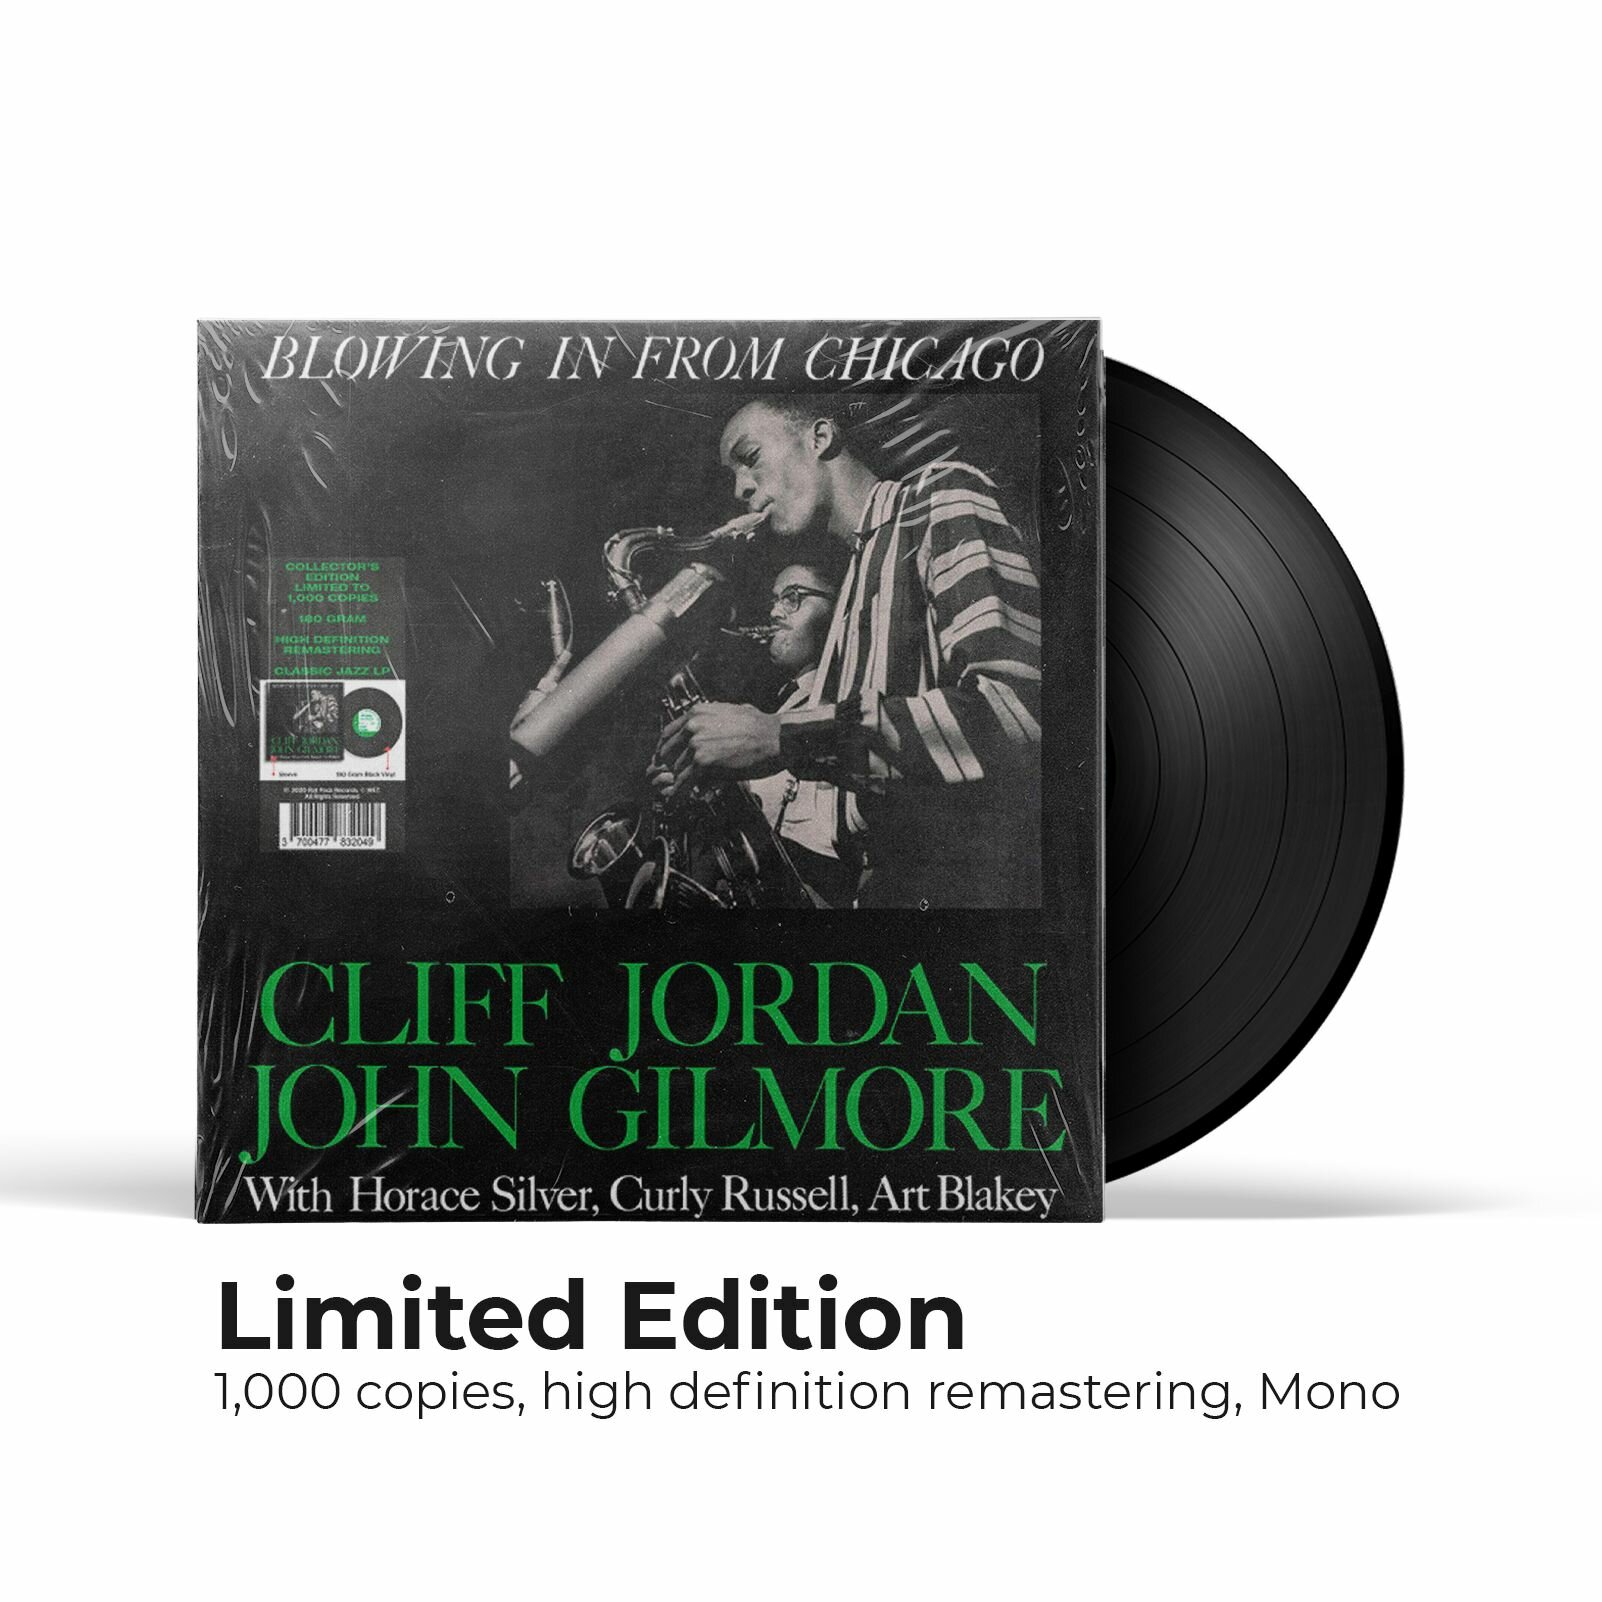 Clifford Jordan & John Gilmore - Blowing In From Chicago (LP), 2020, Limited Edition, Виниловая пластинка